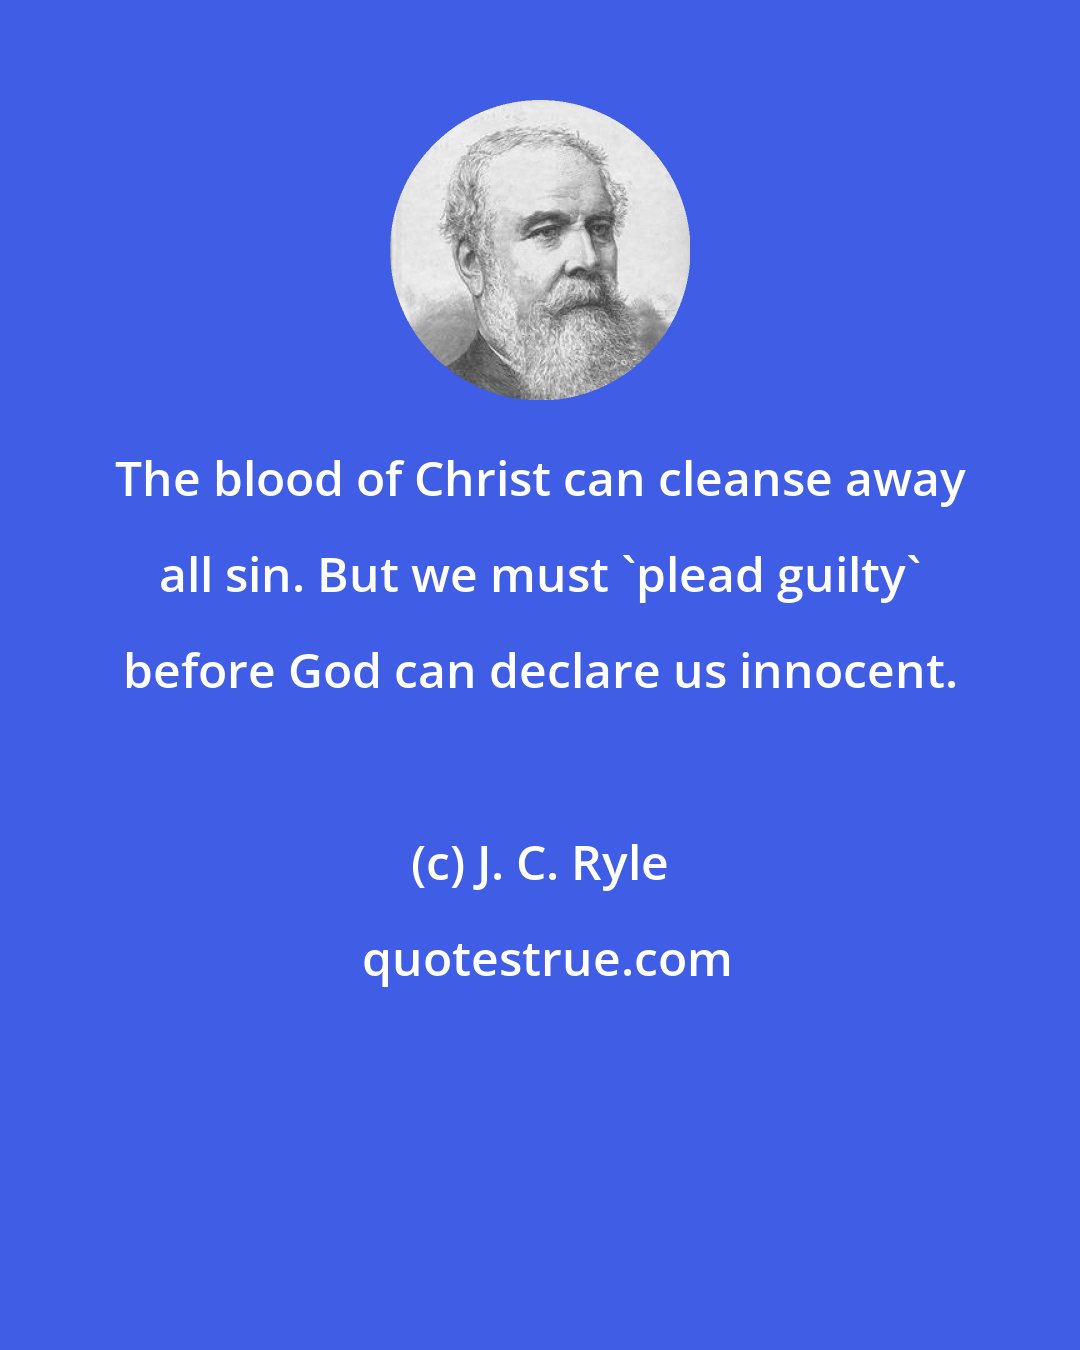 J. C. Ryle: The blood of Christ can cleanse away all sin. But we must 'plead guilty' before God can declare us innocent.